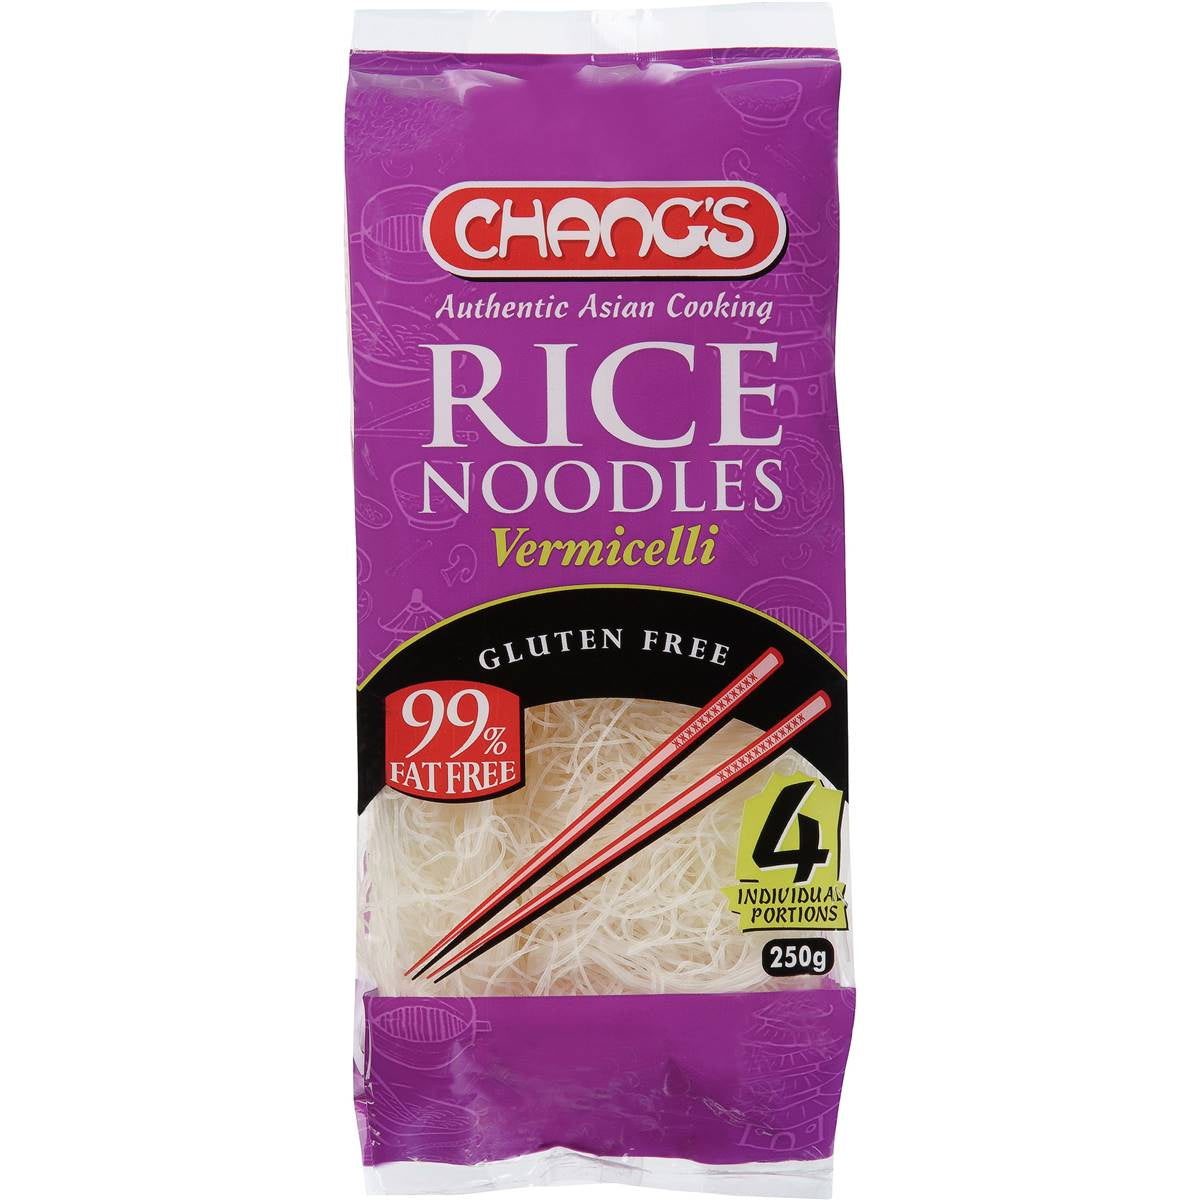 Changs Rice Noodles Vermicelli 250g